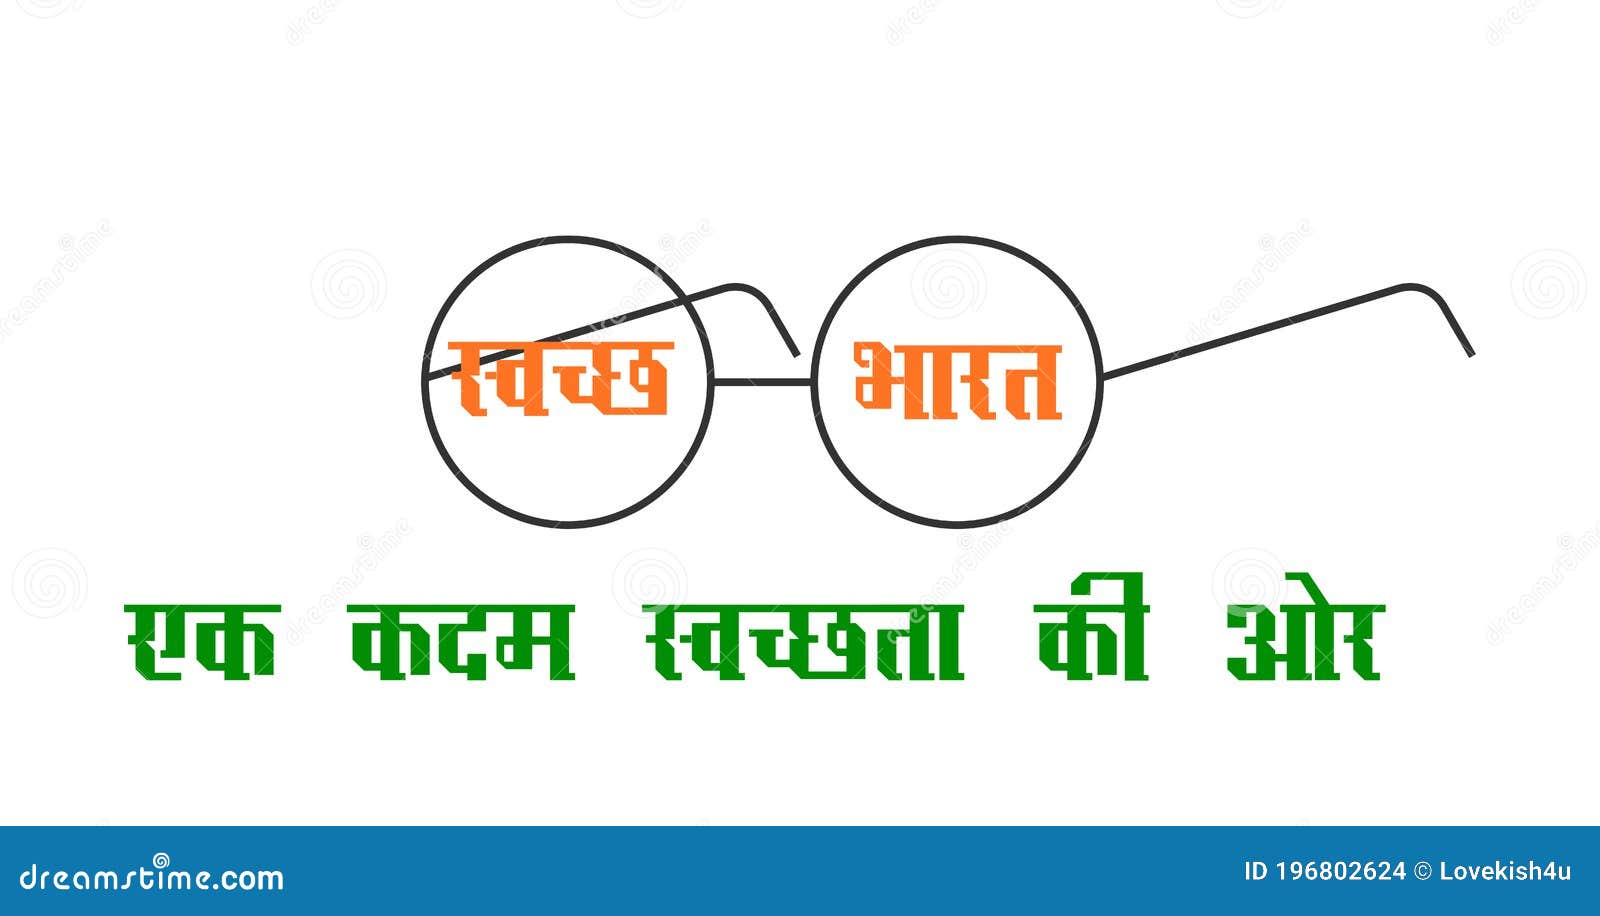 clean india english meaning swachh bharat writtten hindi poster design october clean india campaign clean india 196802624